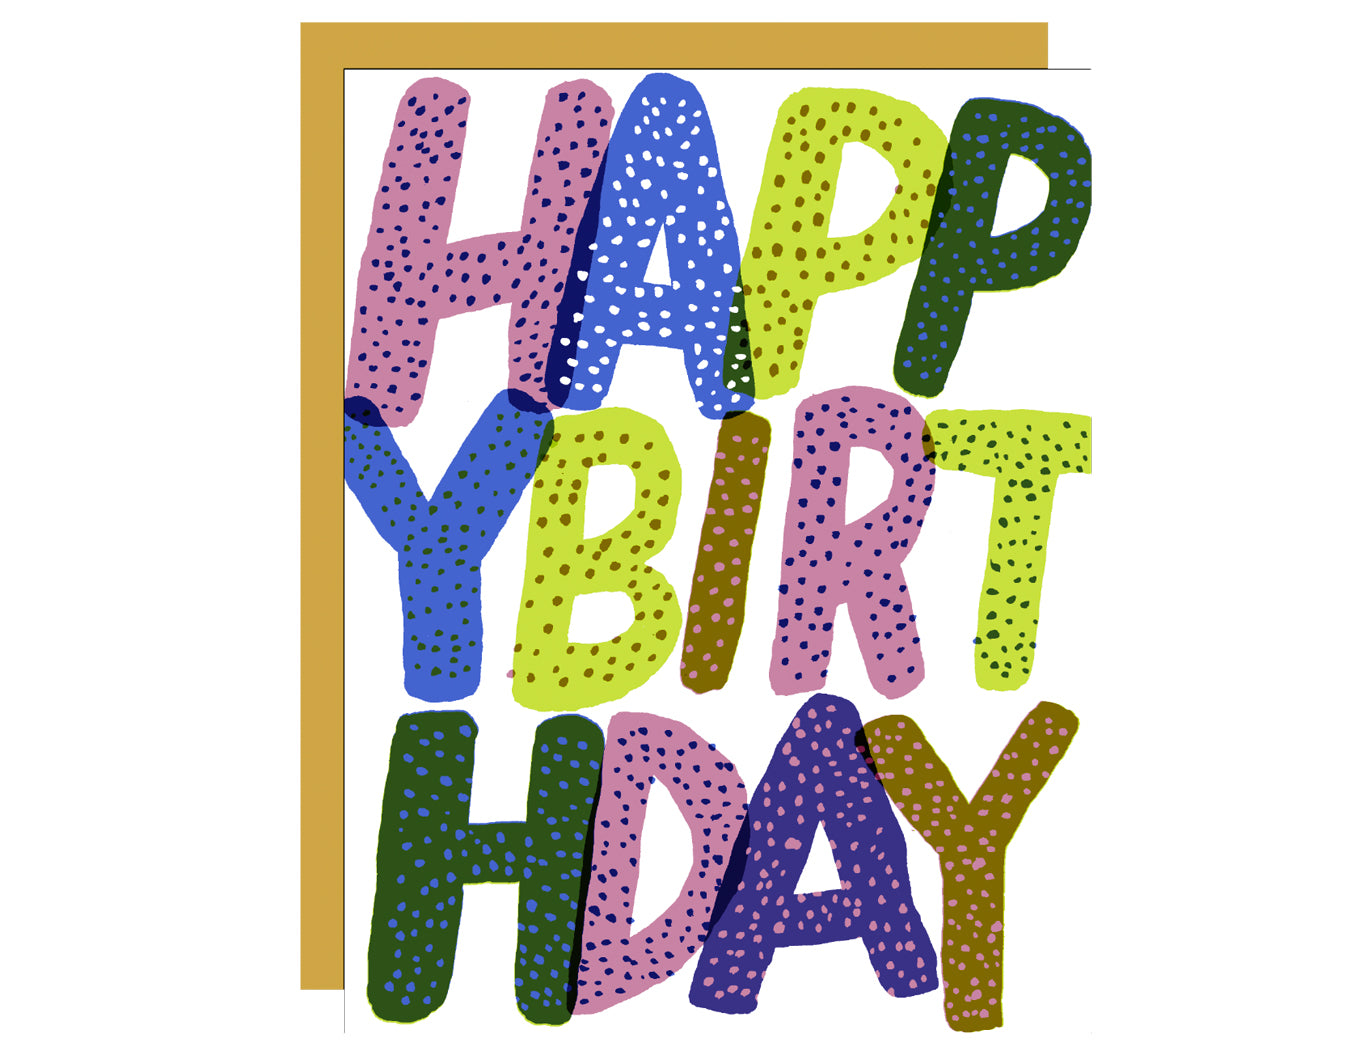 text fills up card reads happy birthday, letters are large, colorful and filled in with dots